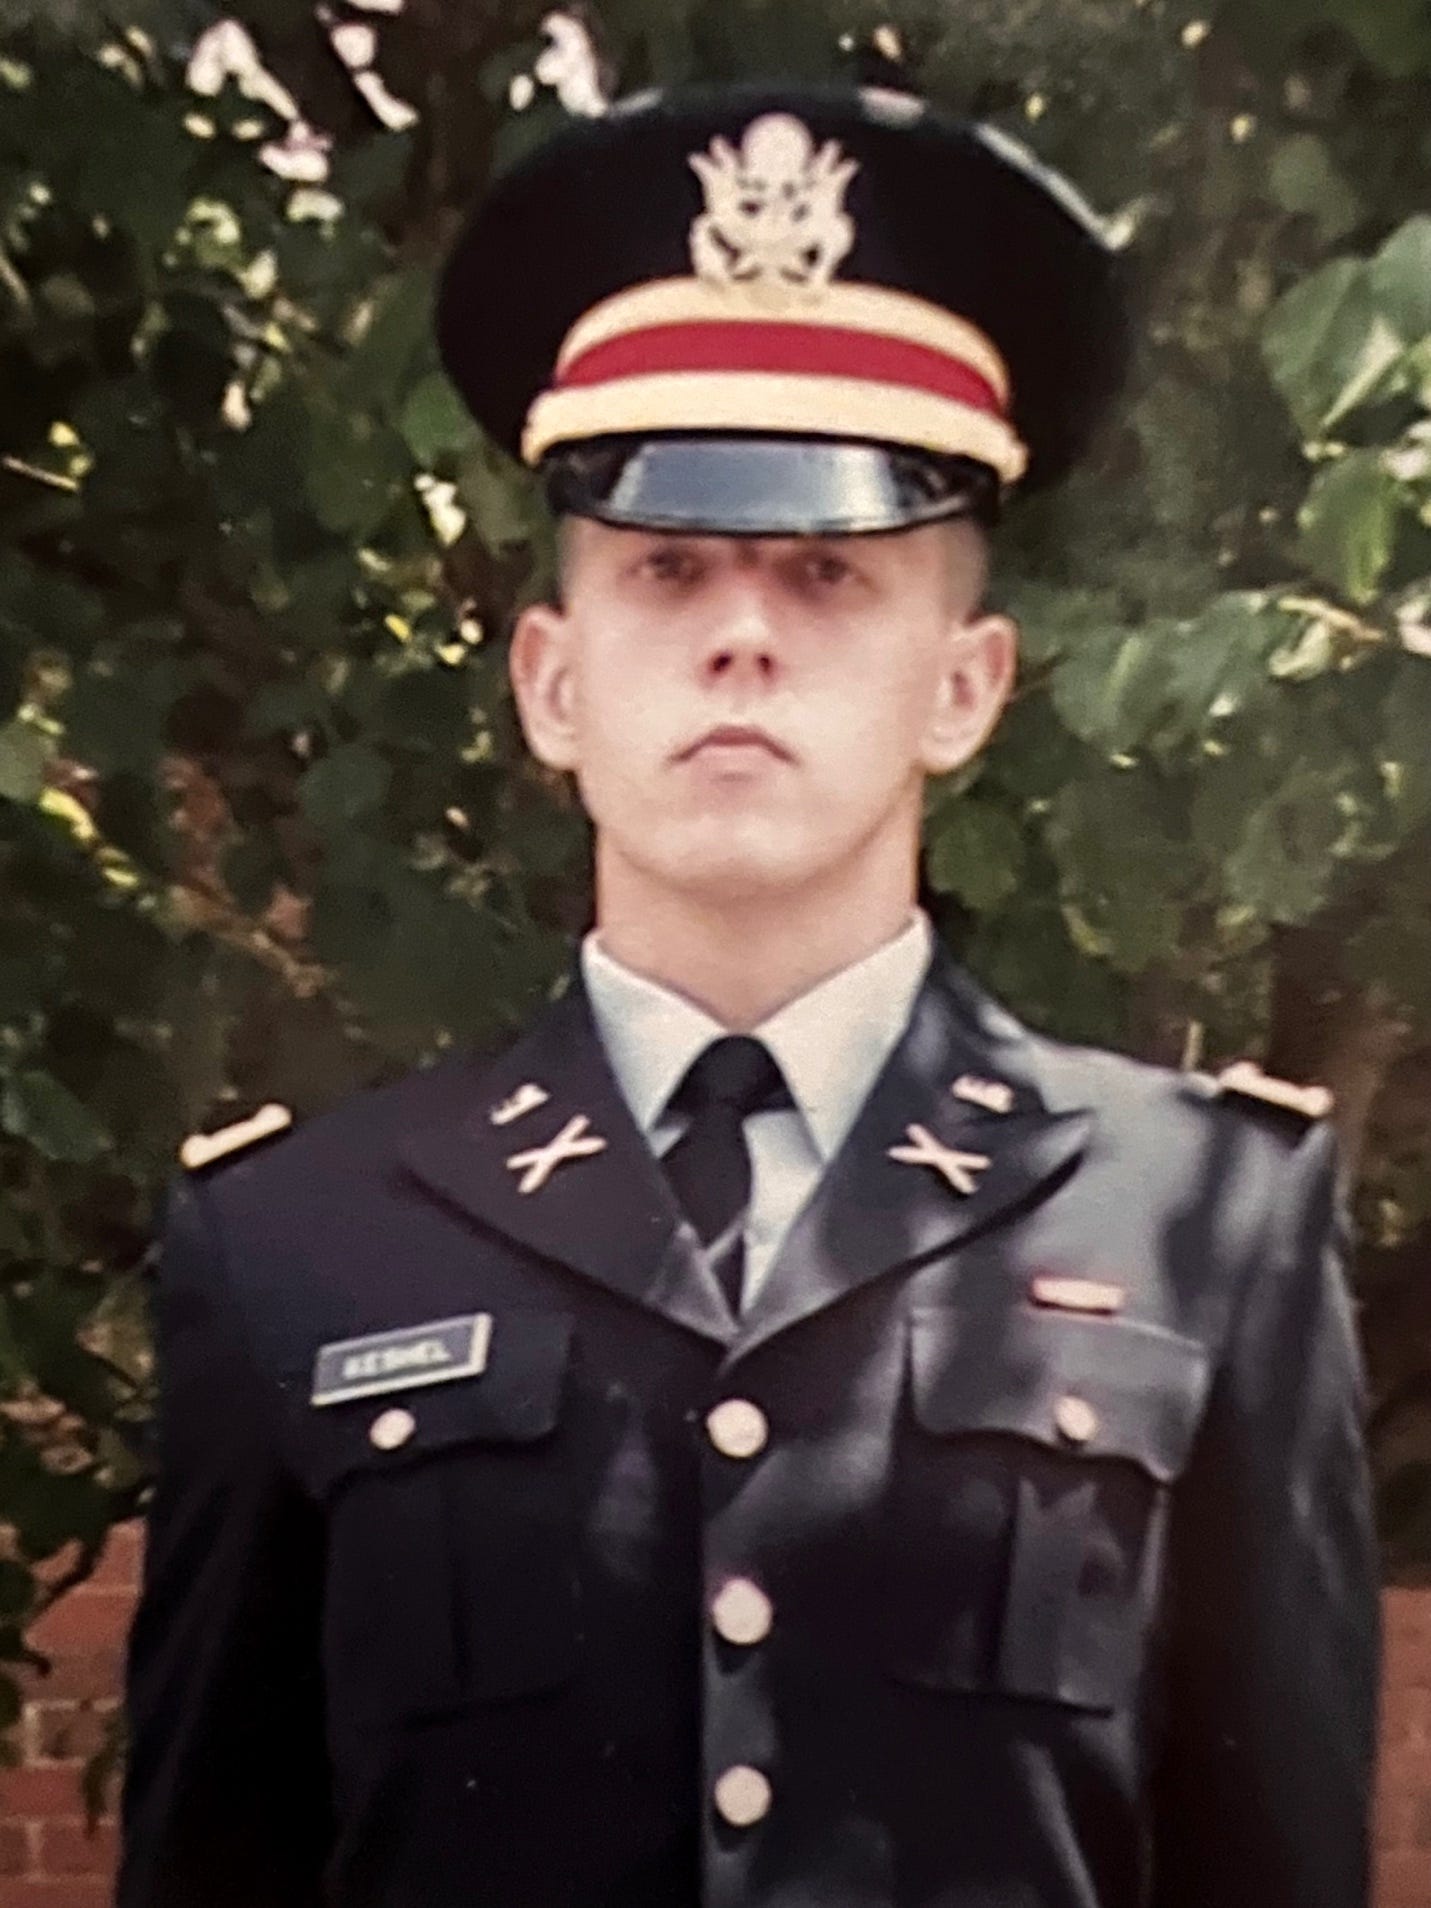 A person in a military uniform

Description automatically generated with medium confidence